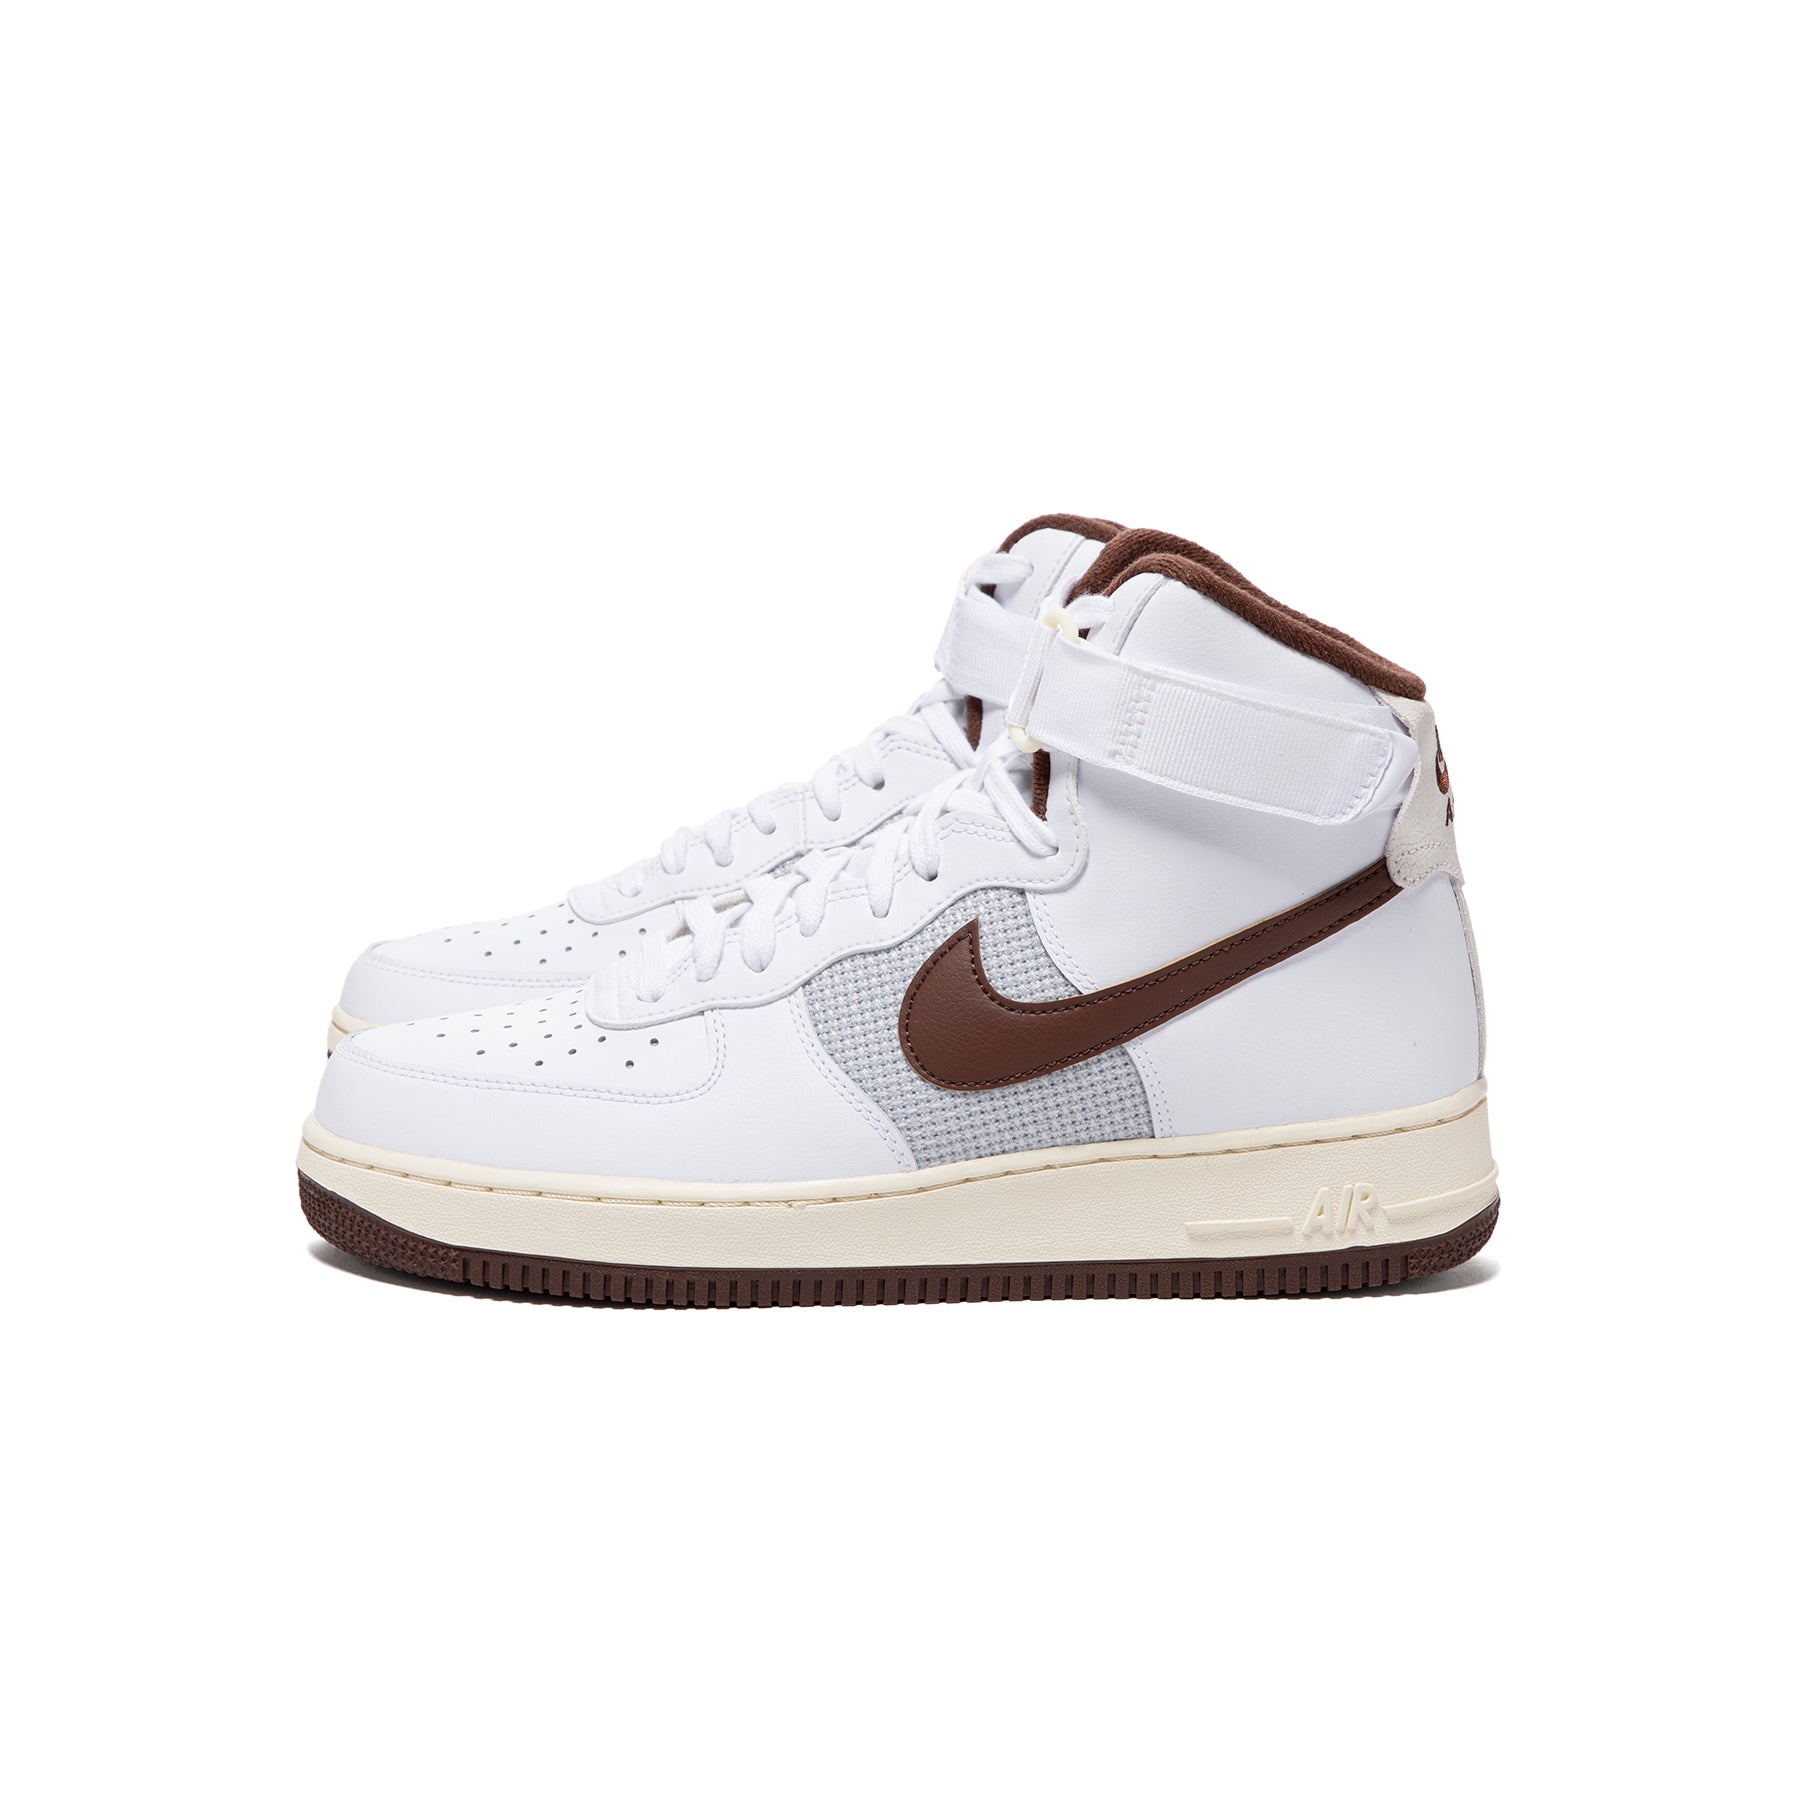 Nike - Nike Air Force 1 High '07 LV8 Vintage  HBX - Globally Curated  Fashion and Lifestyle by Hypebeast